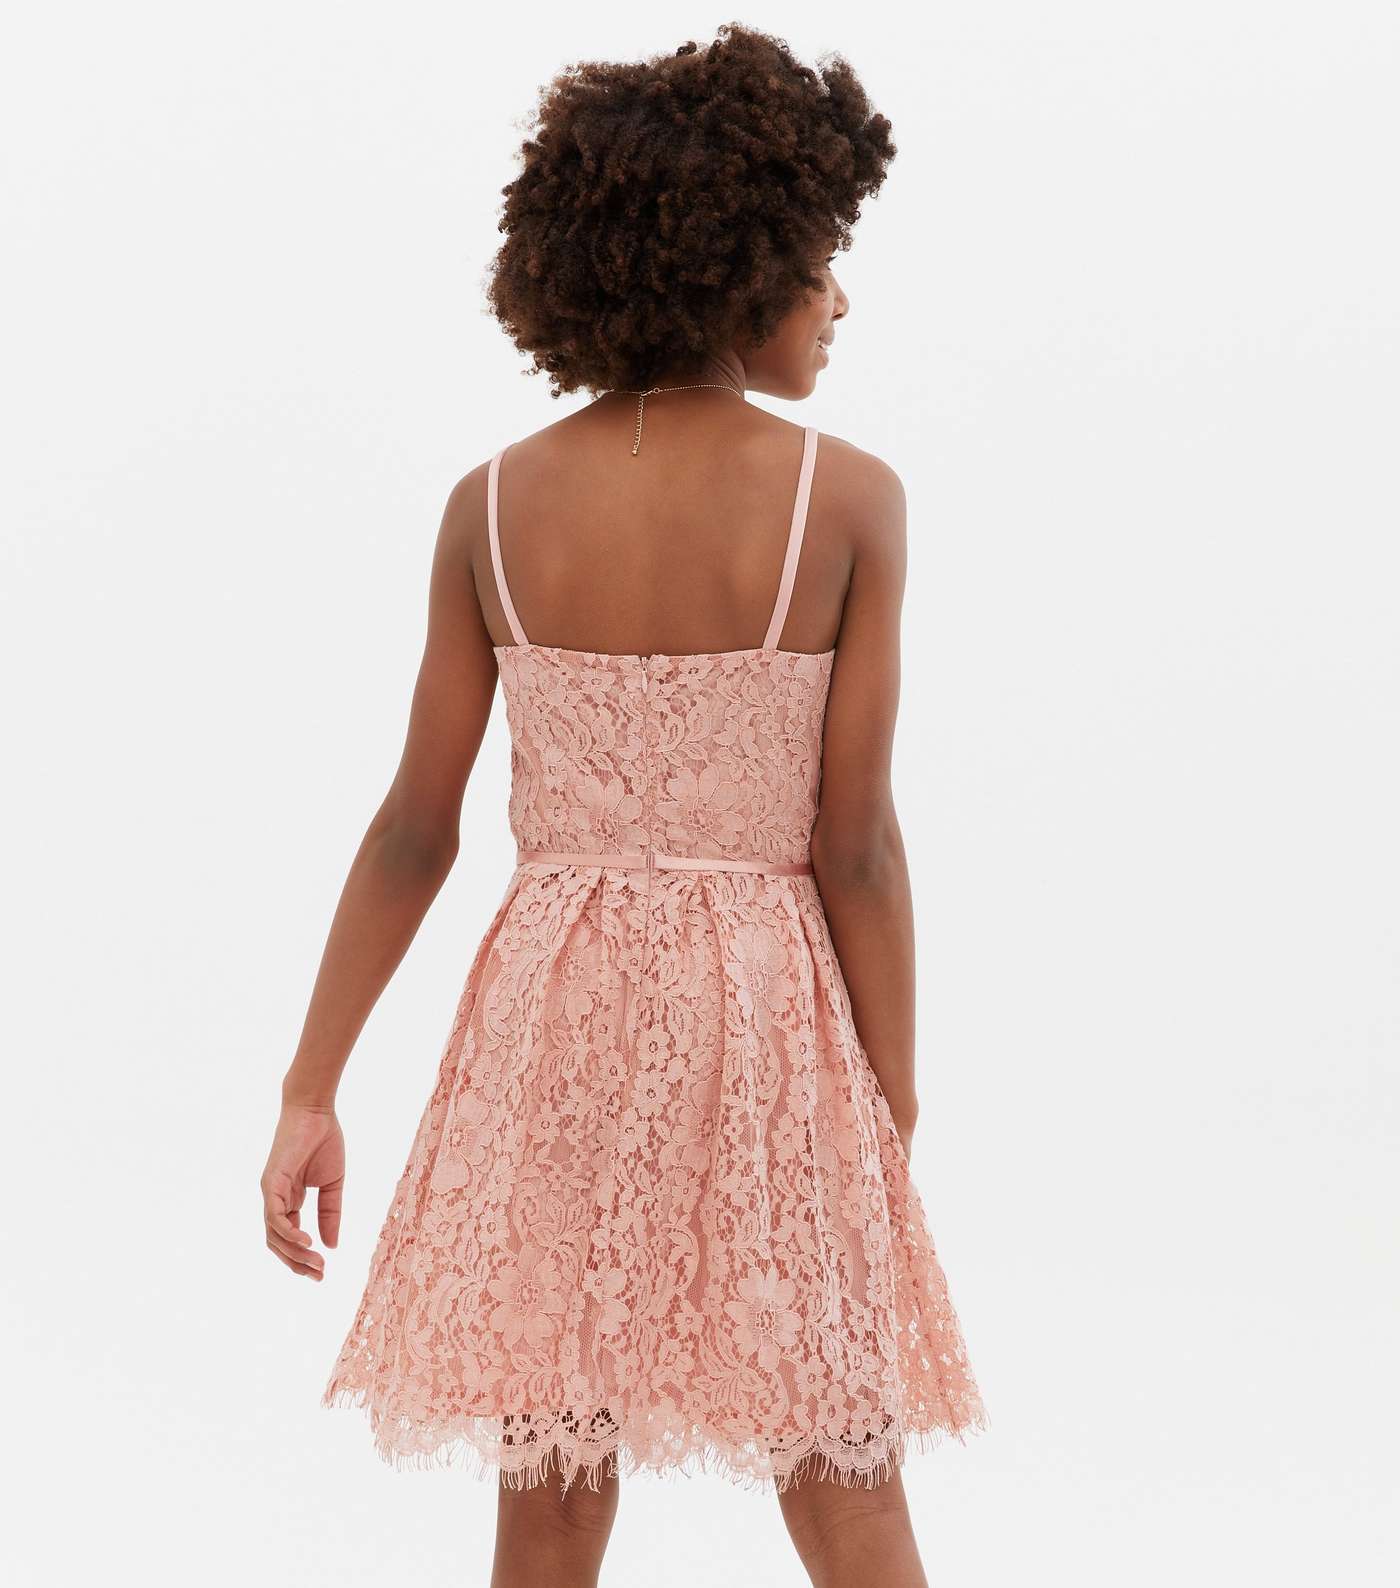 Girls Pale Pink Lace Strappy Dress Image 4